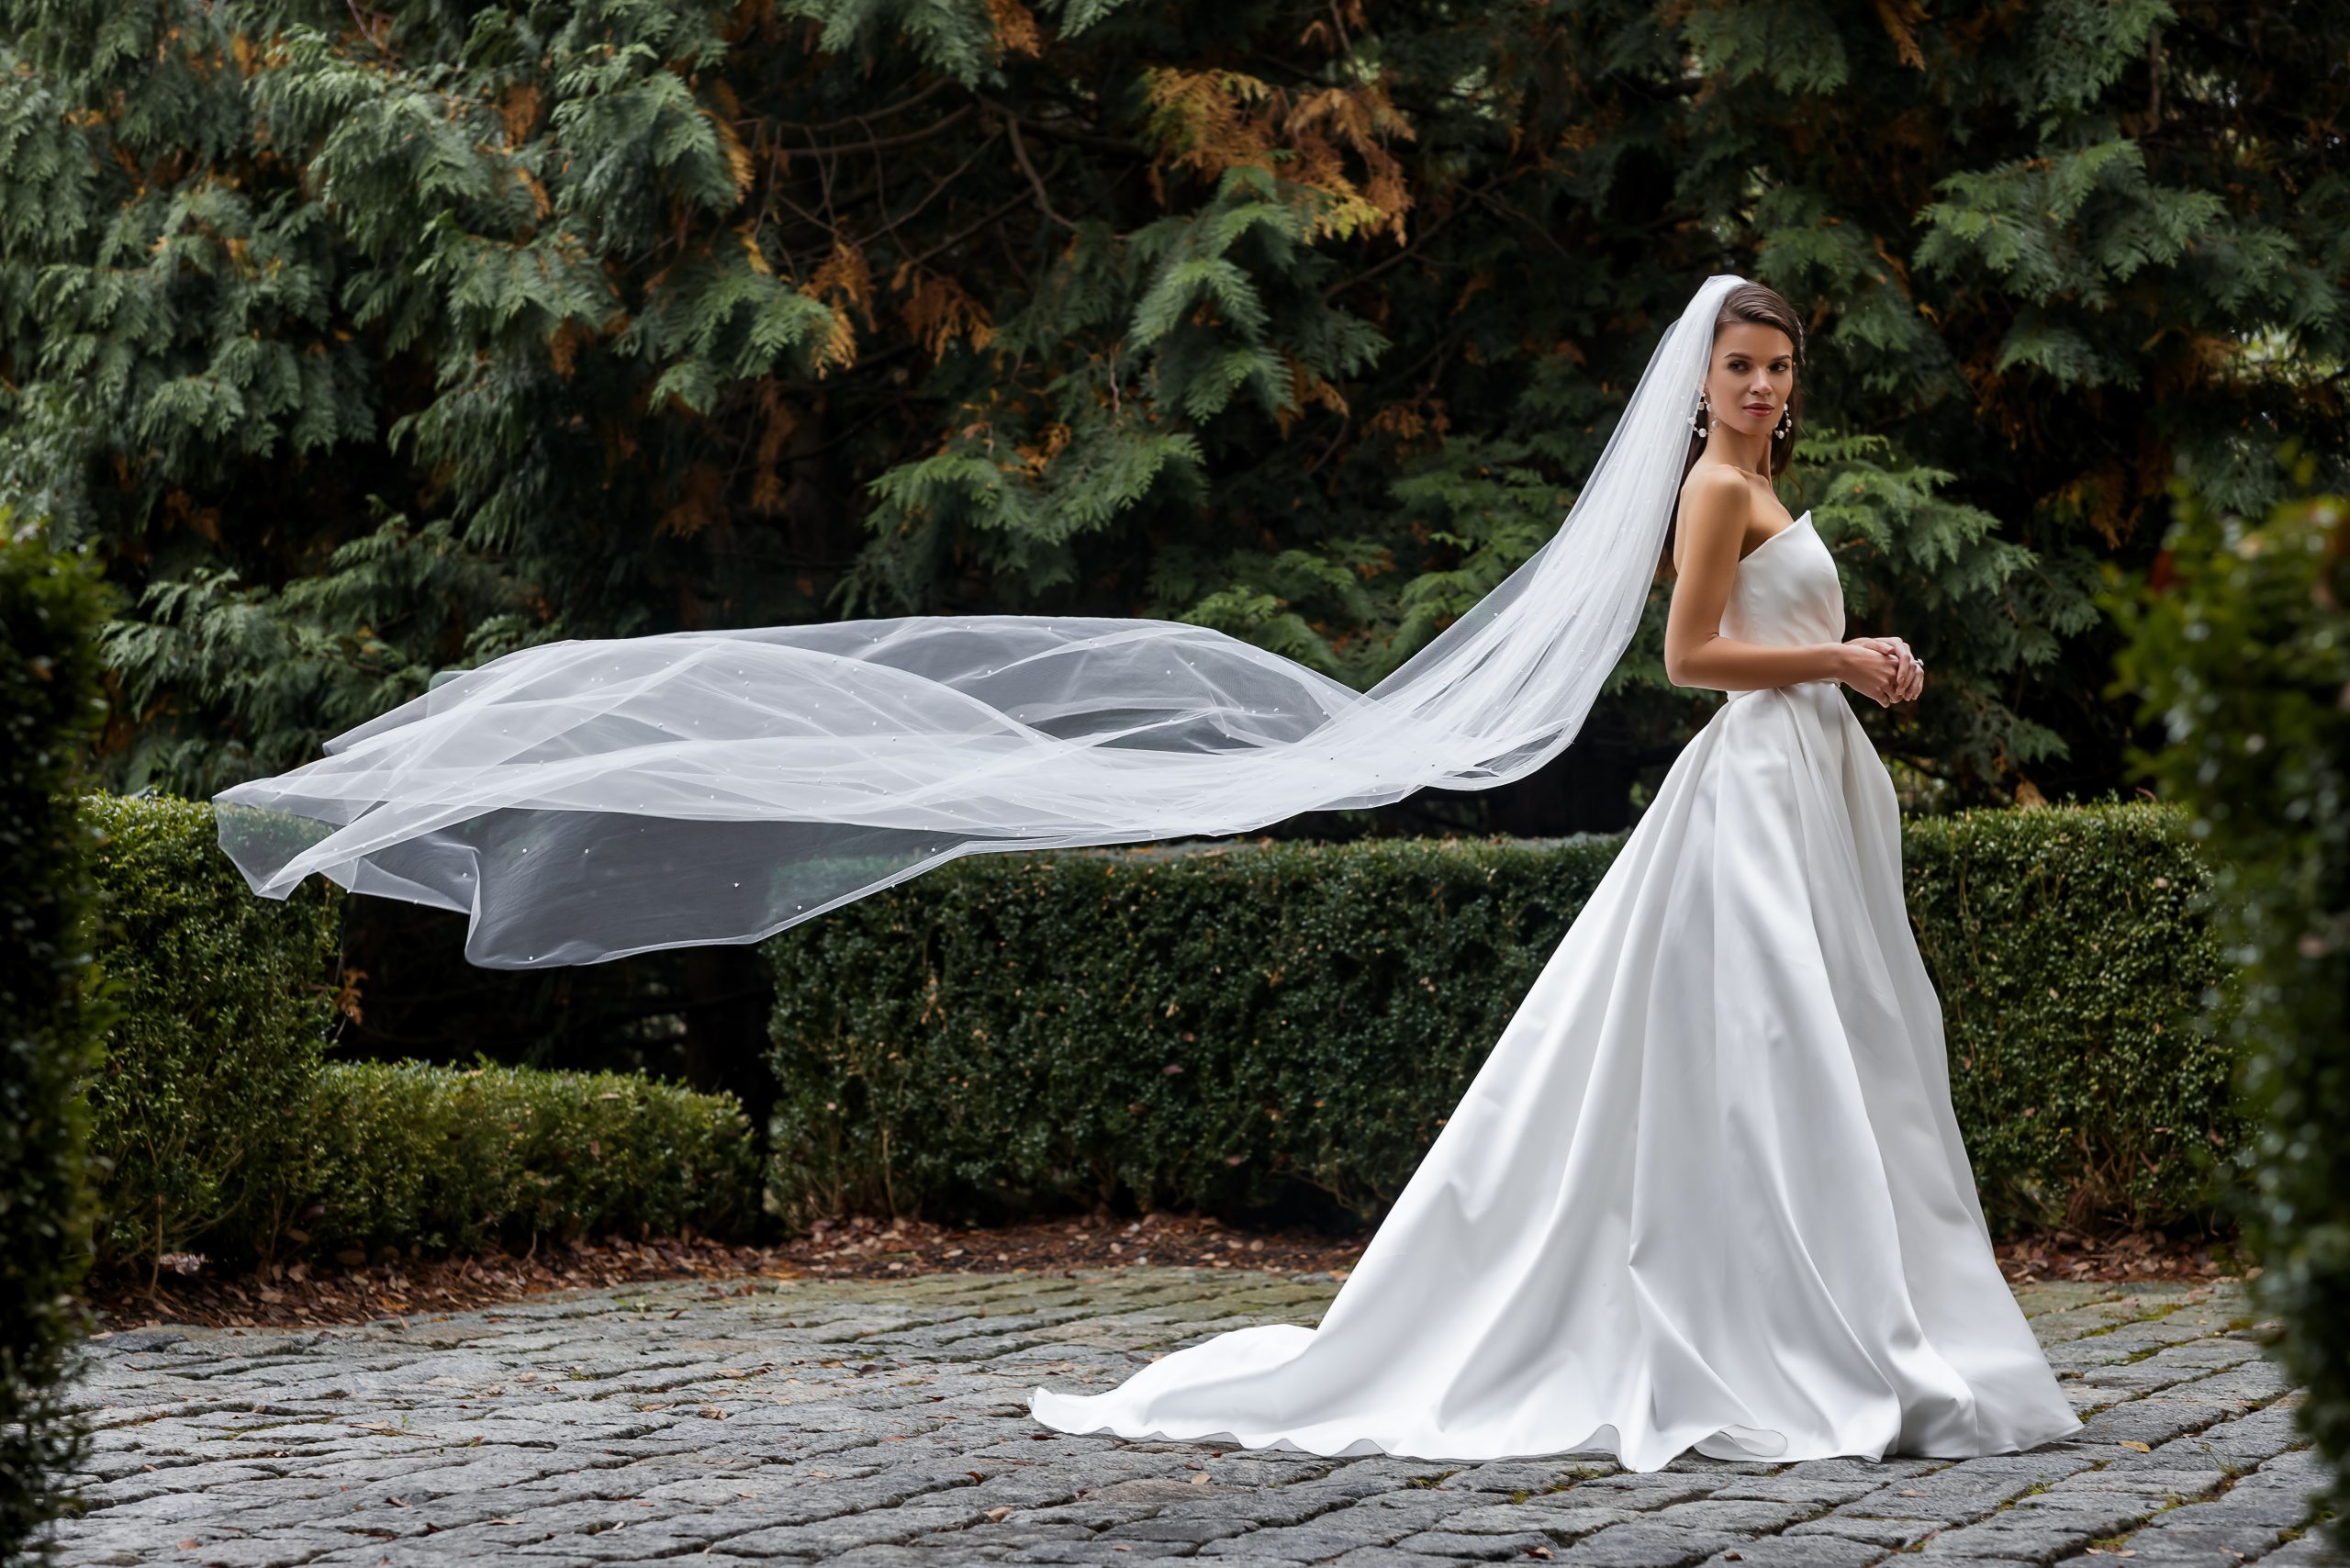 Which wedding veil for which wedding dress? Take a look at this